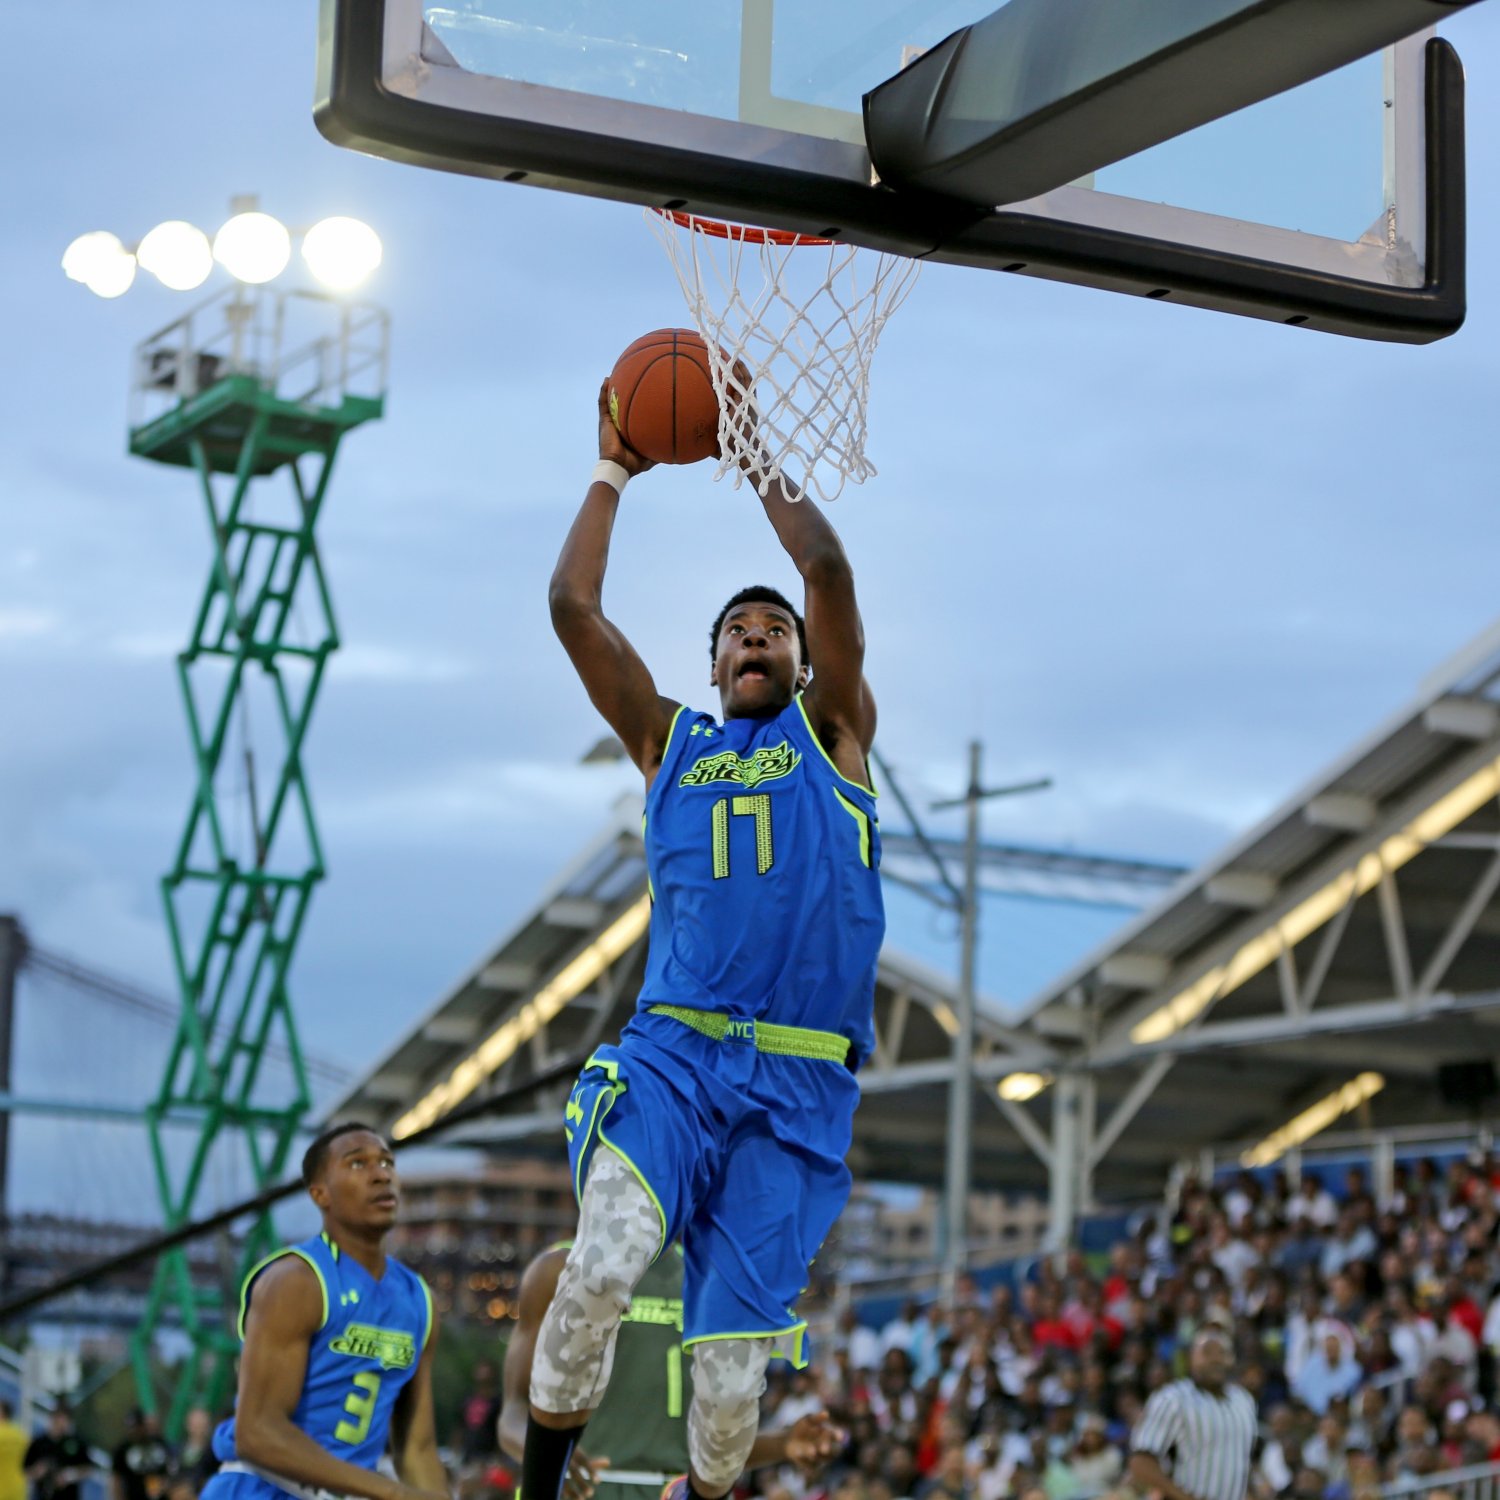 Under Armour Elite 24 2015: Date, TV Schedule, Rosters and Preview 